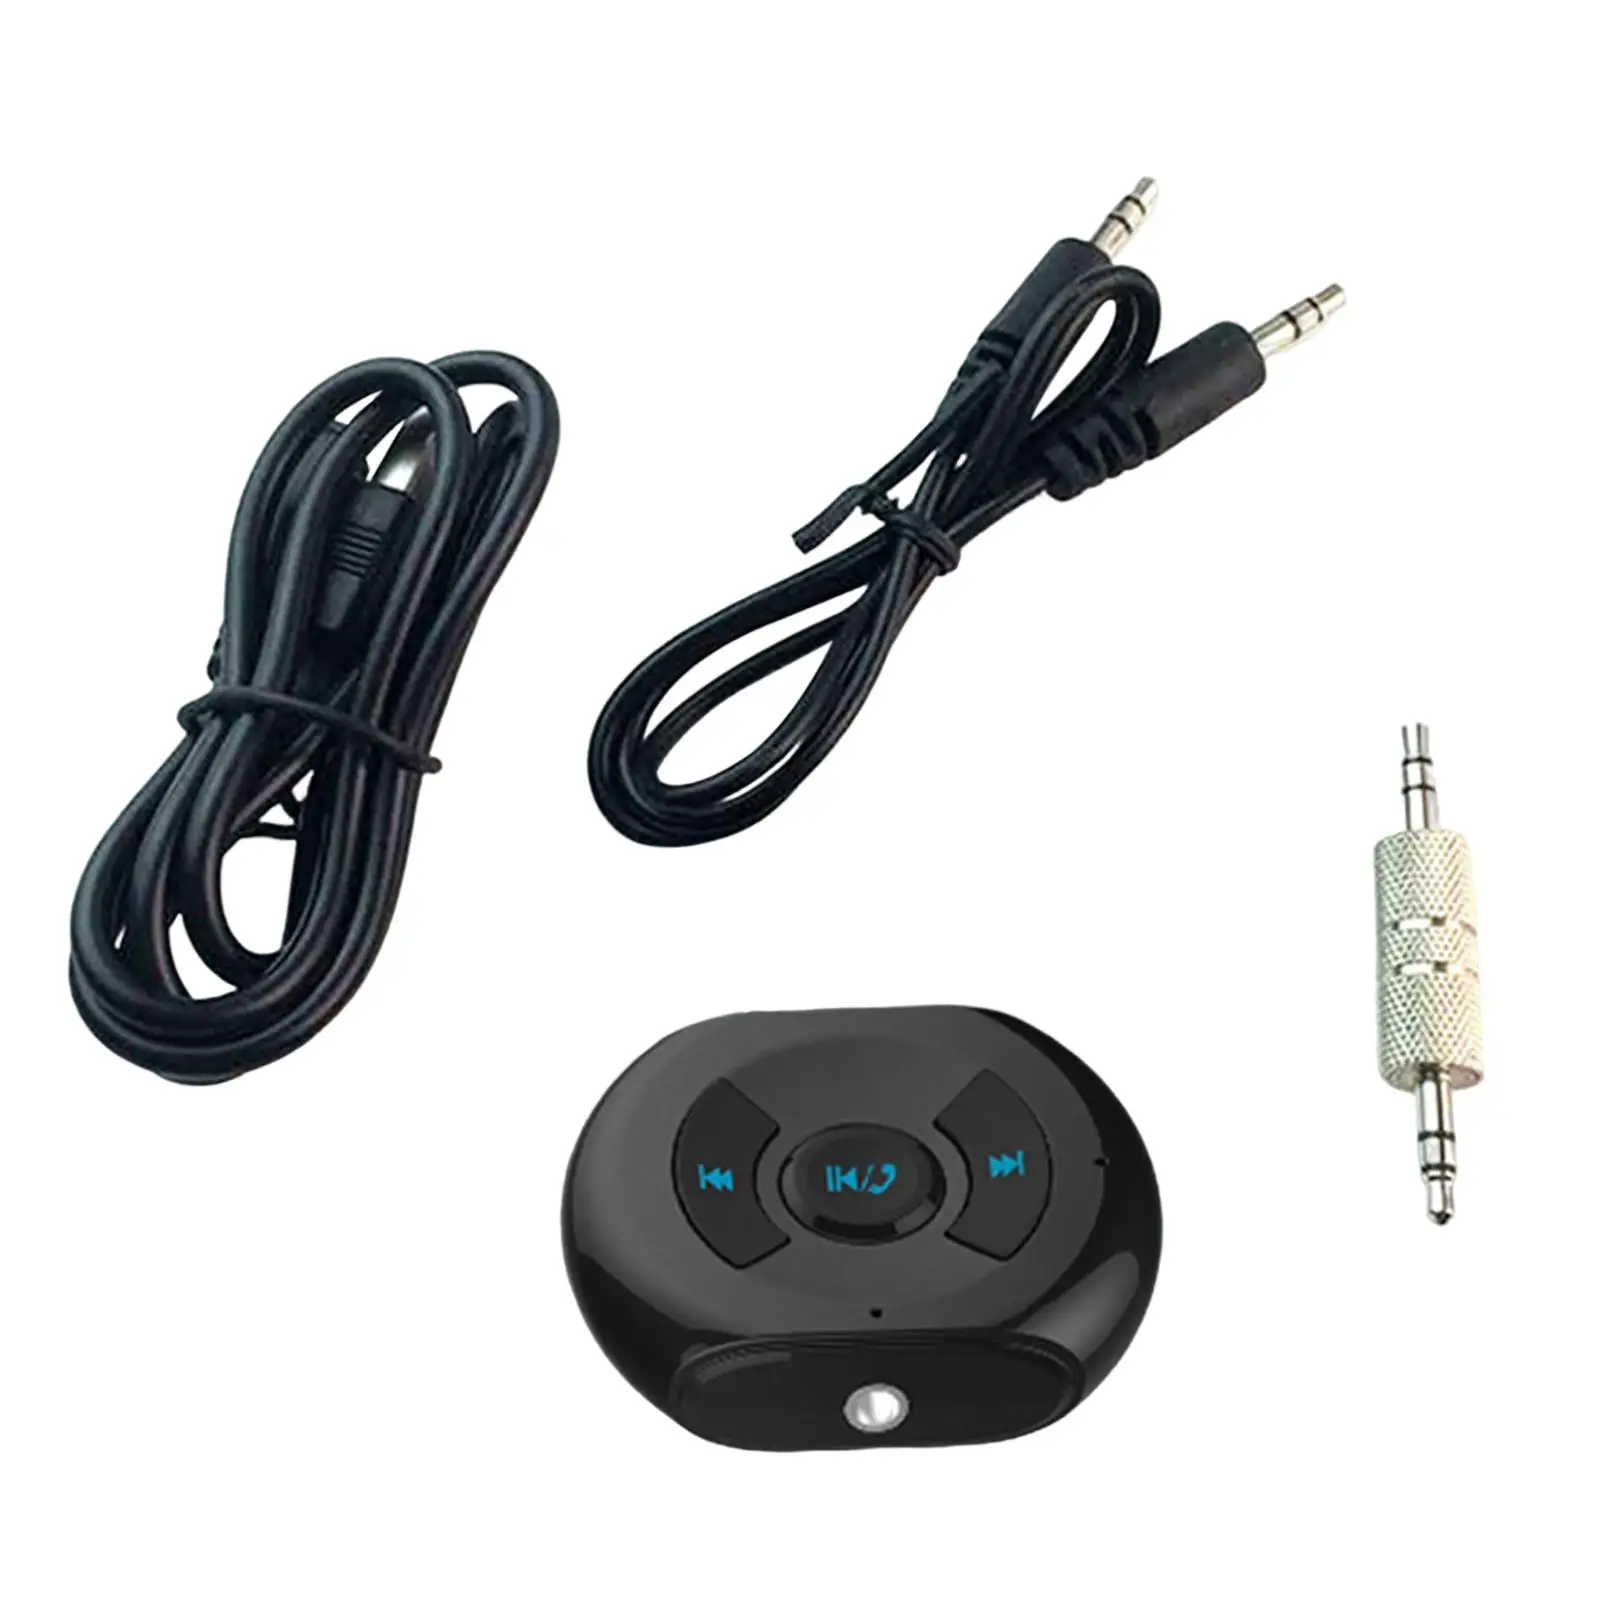 AUX Bluetooth Receiver for Car Music with Audio Cable Lightweight for Home Stereo Hands Free Calls Easy to Carry Auto Reconnect